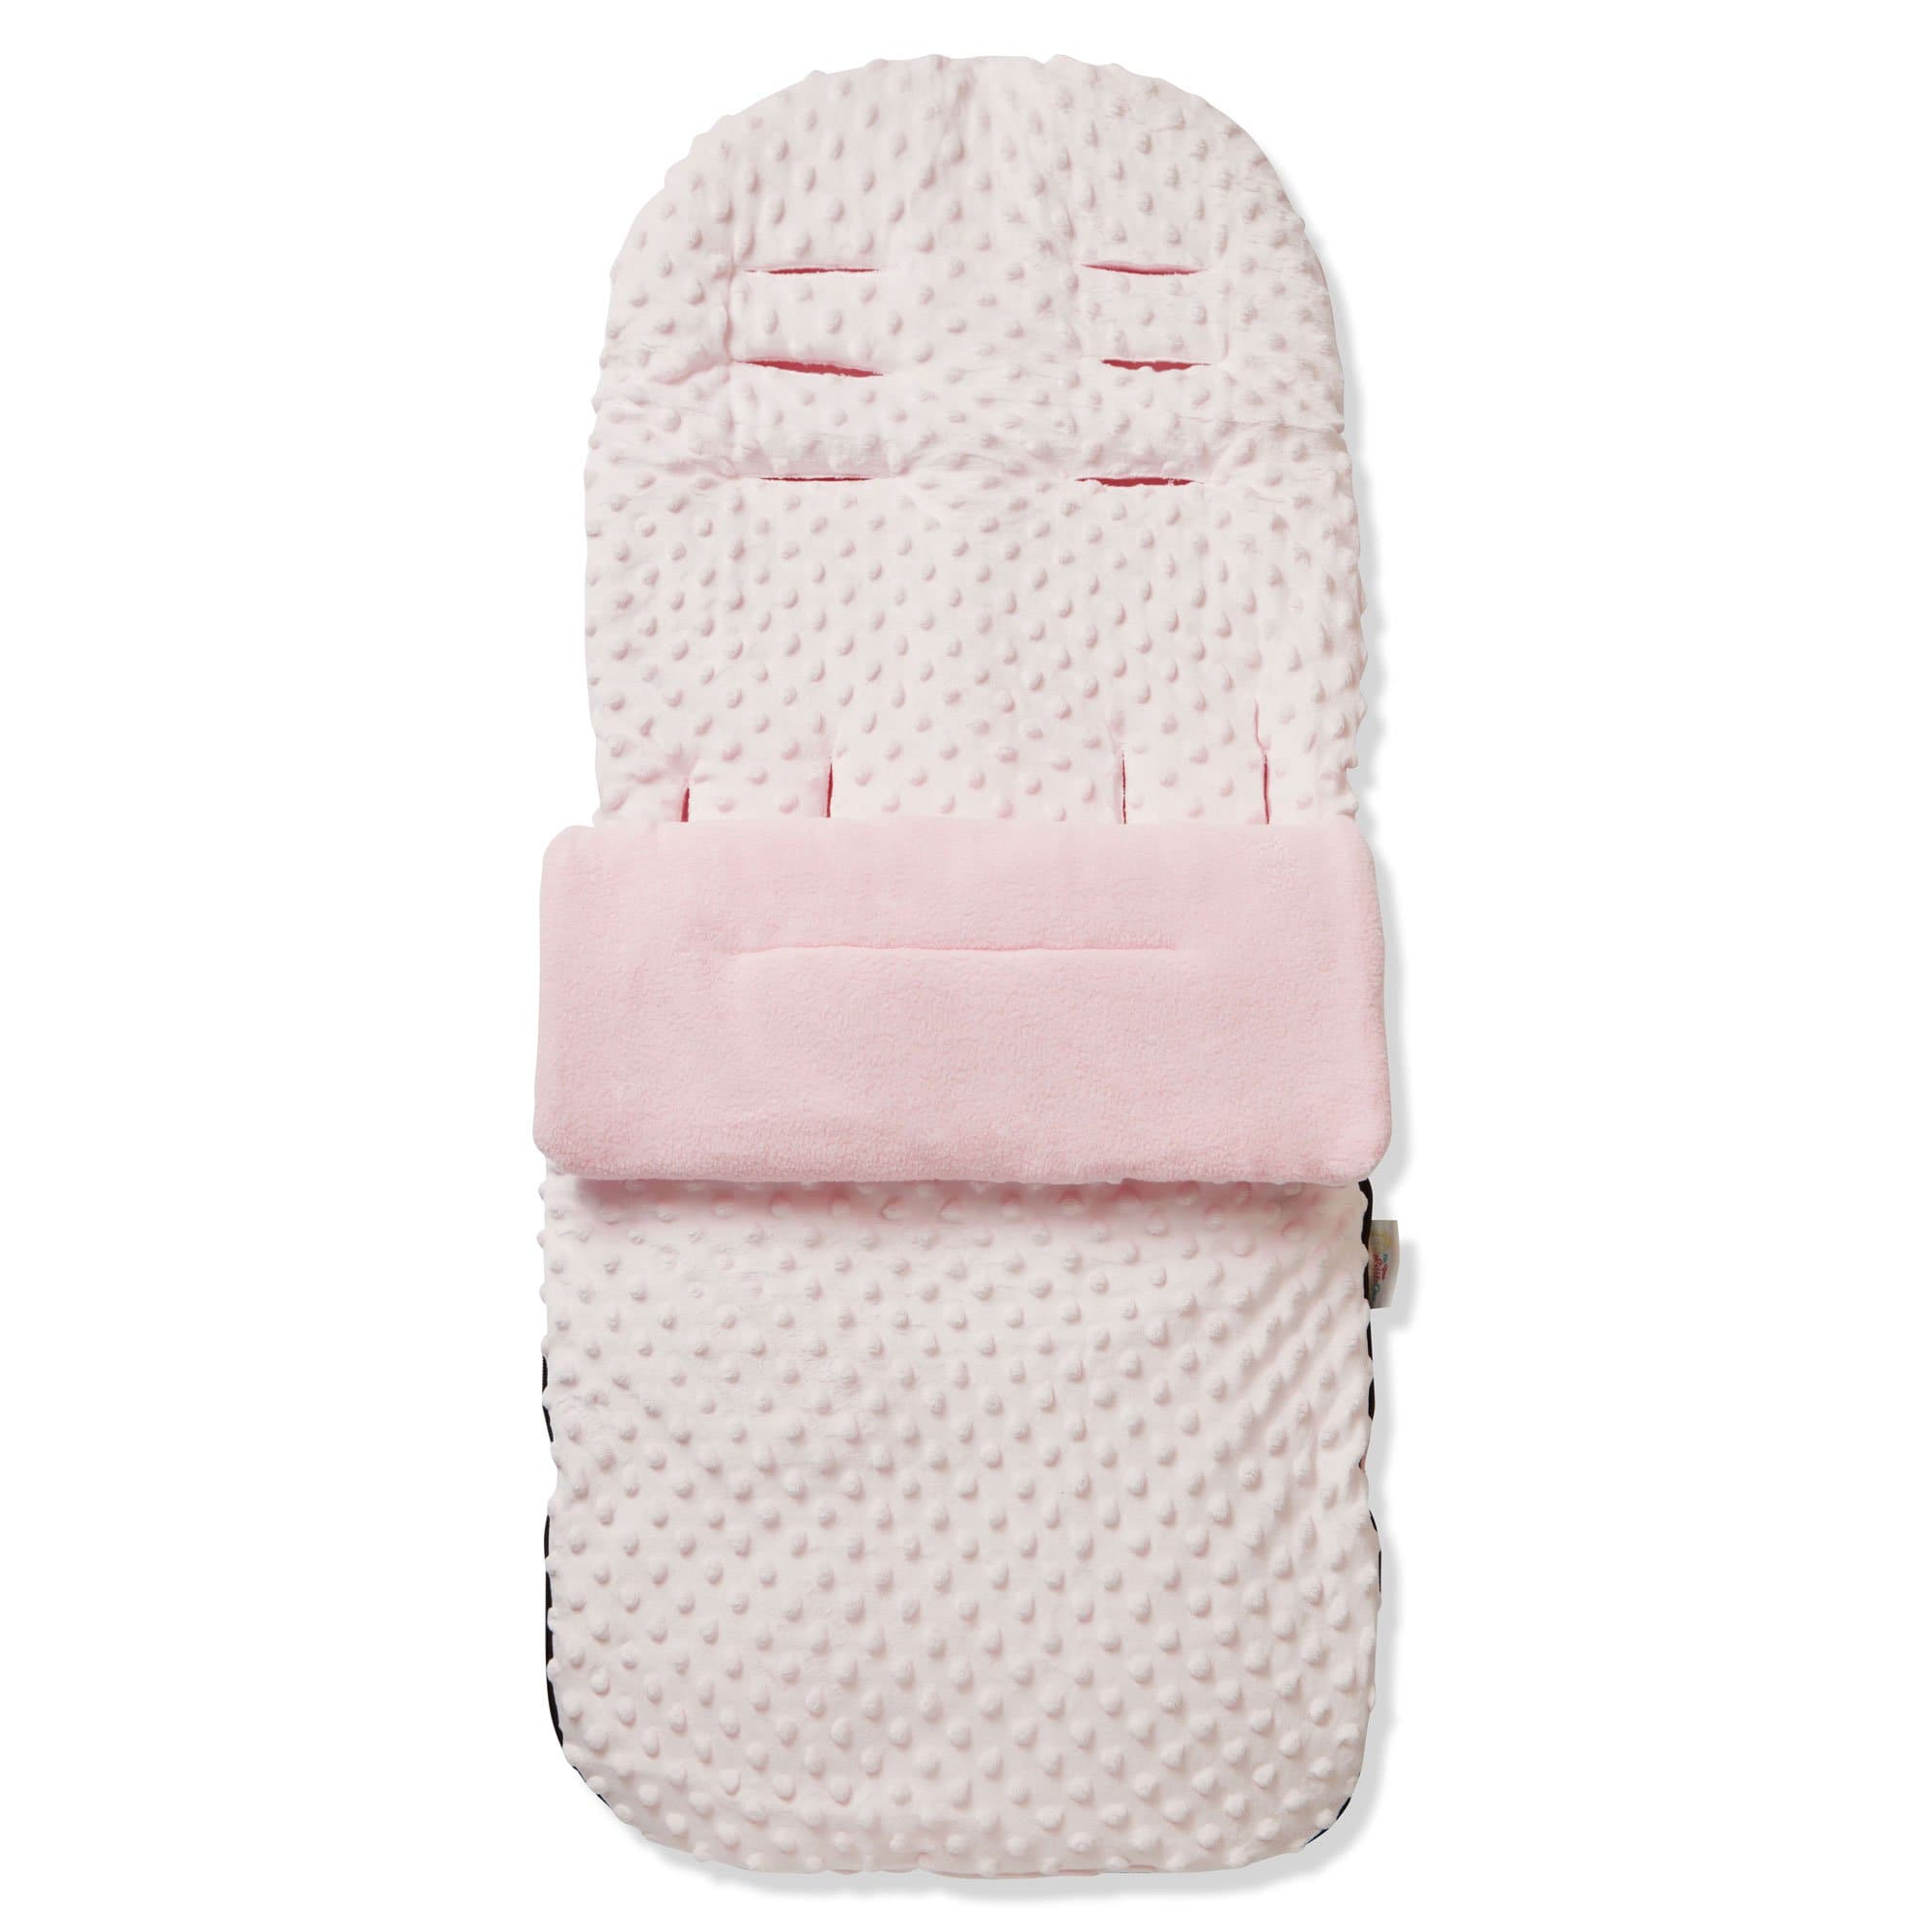 Universal Dimple Footmuff / Cosy Toes - Fits All Pushchairs / Prams & Buggies - Pink / Fits All Models | For Your Little One